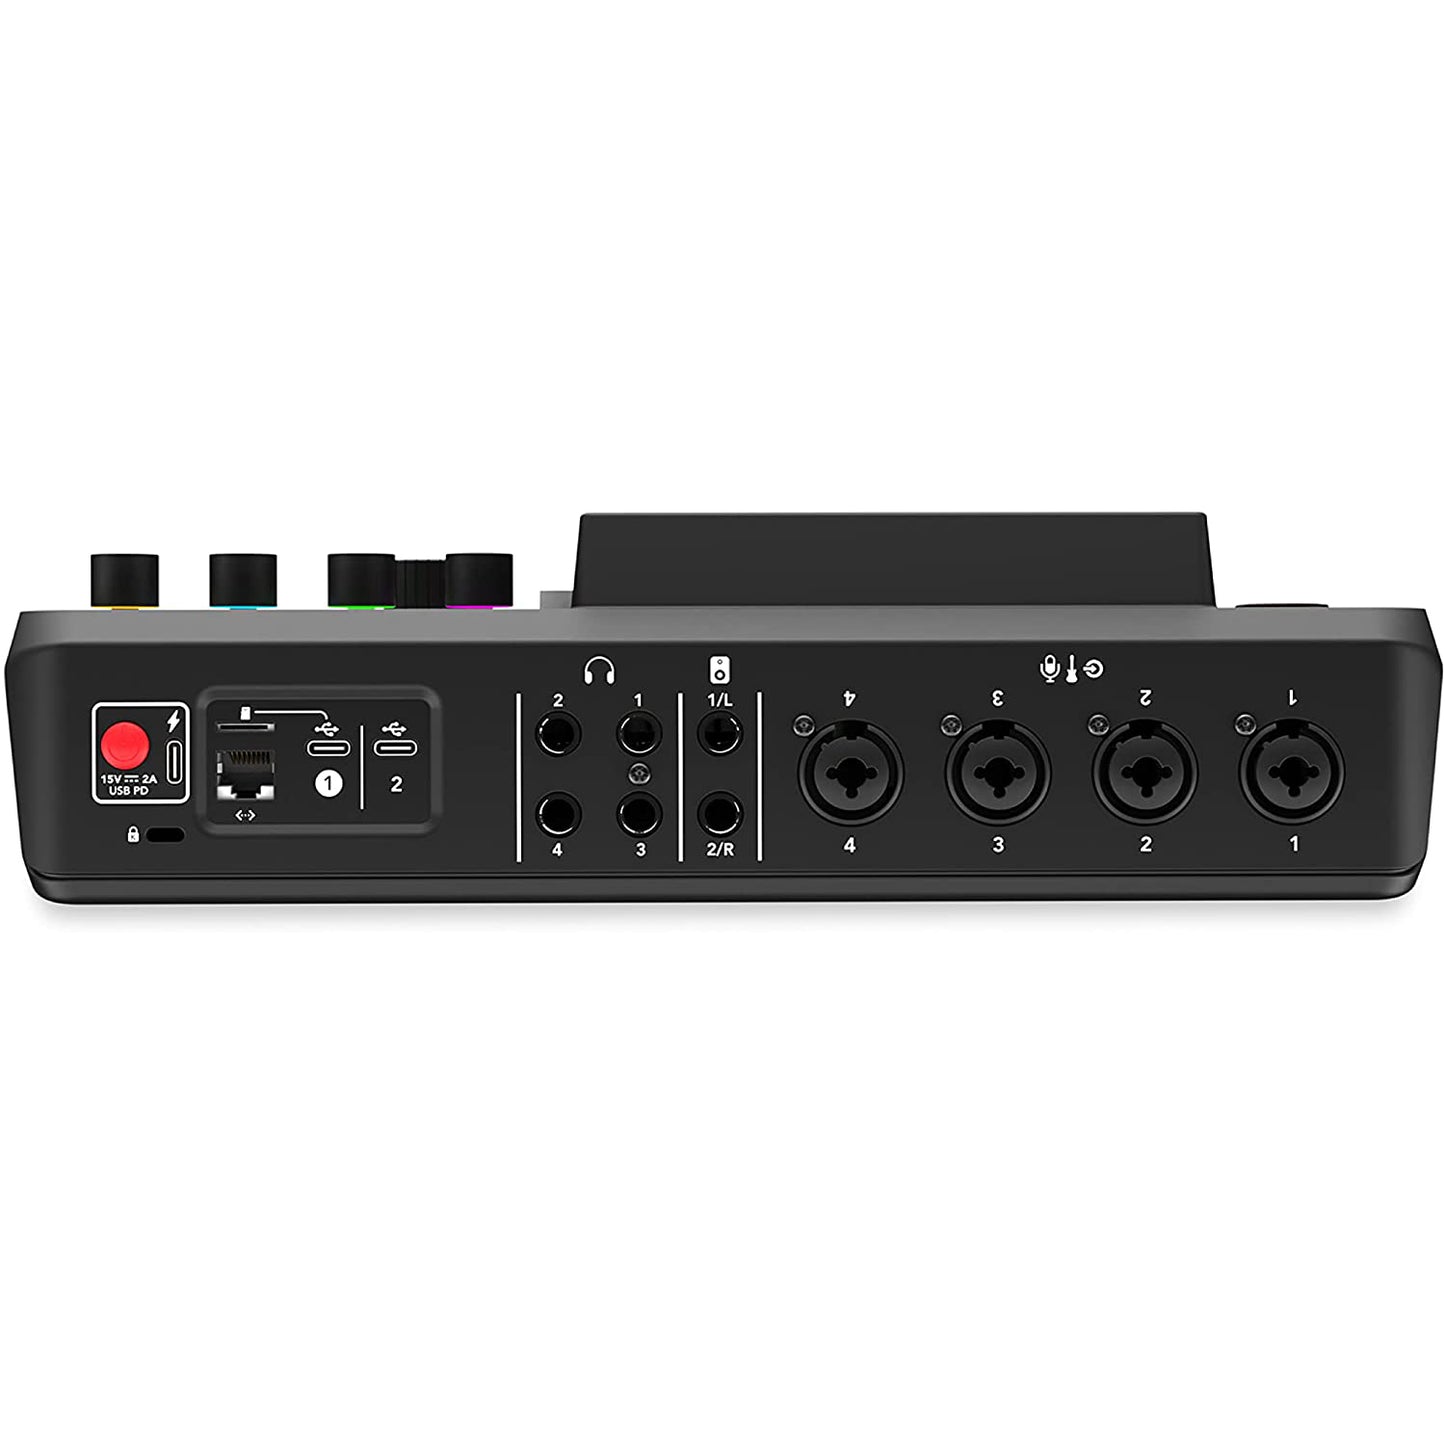 Rode Rodecaster Pro II Integrated Audio Production Console